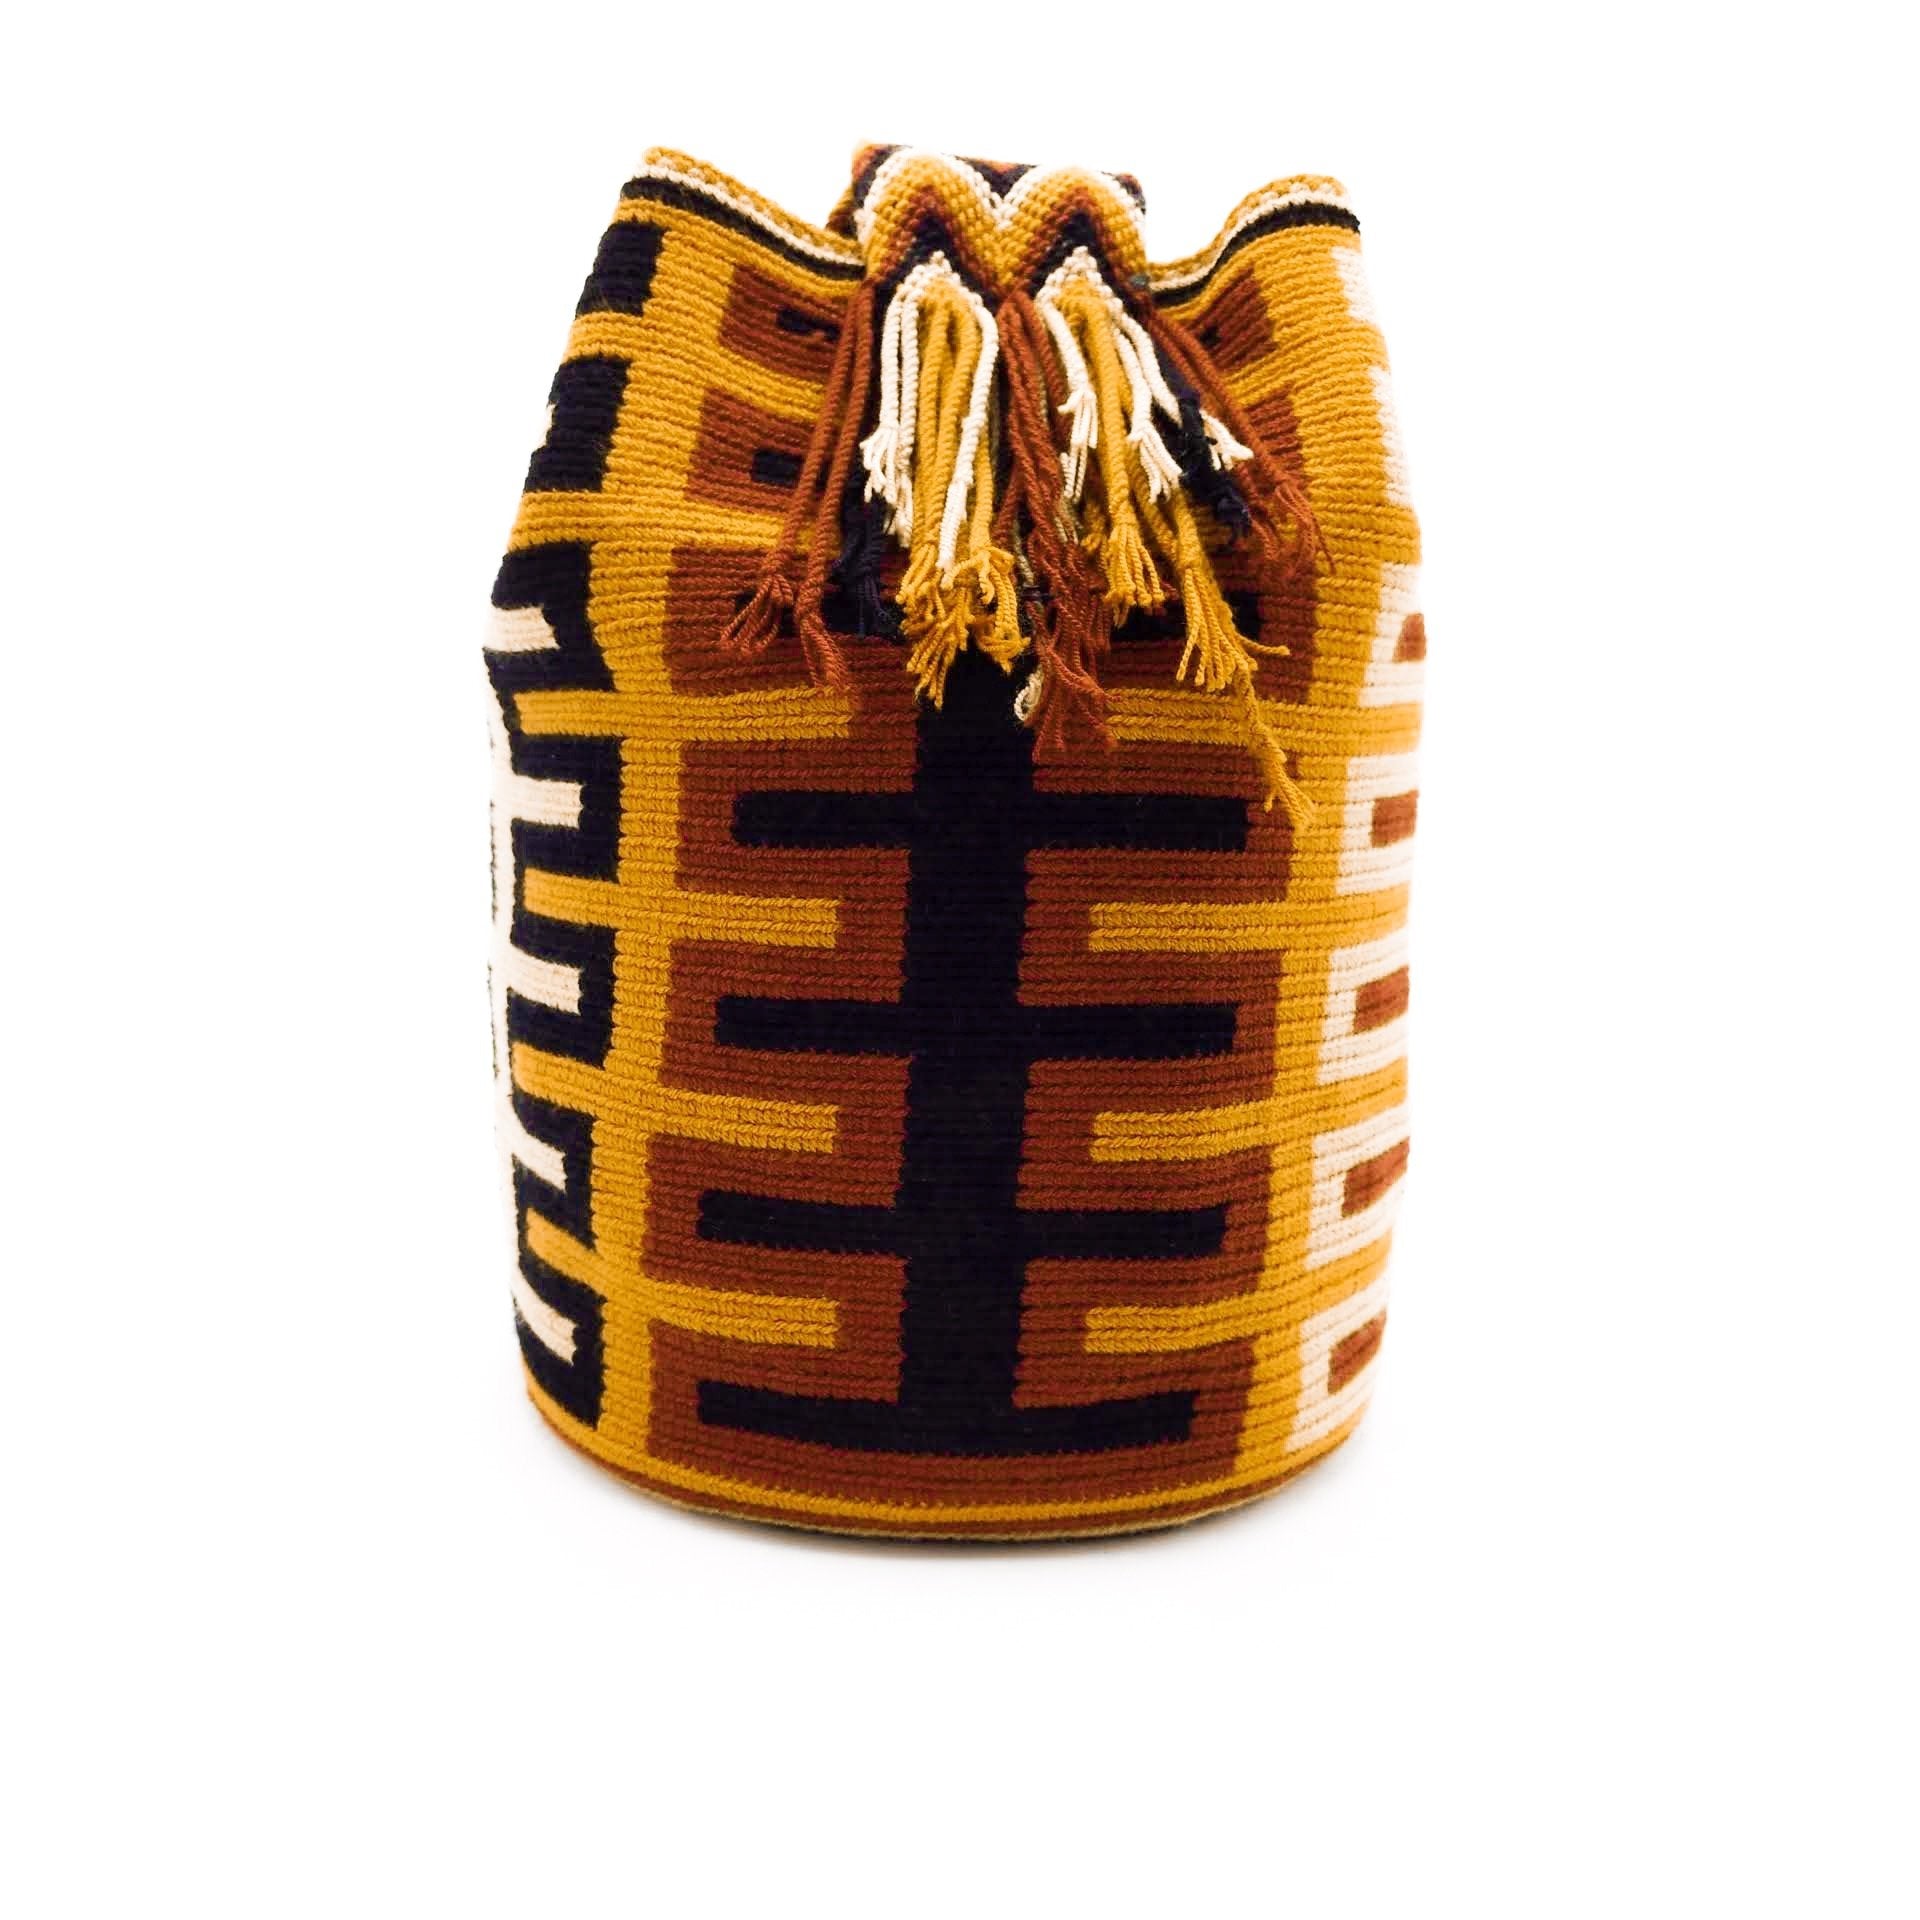 Side view of a pretty Wayuu Mochila bag with an awesome pattern in earthy colors such as Amber, Tan, Carmine, and Black